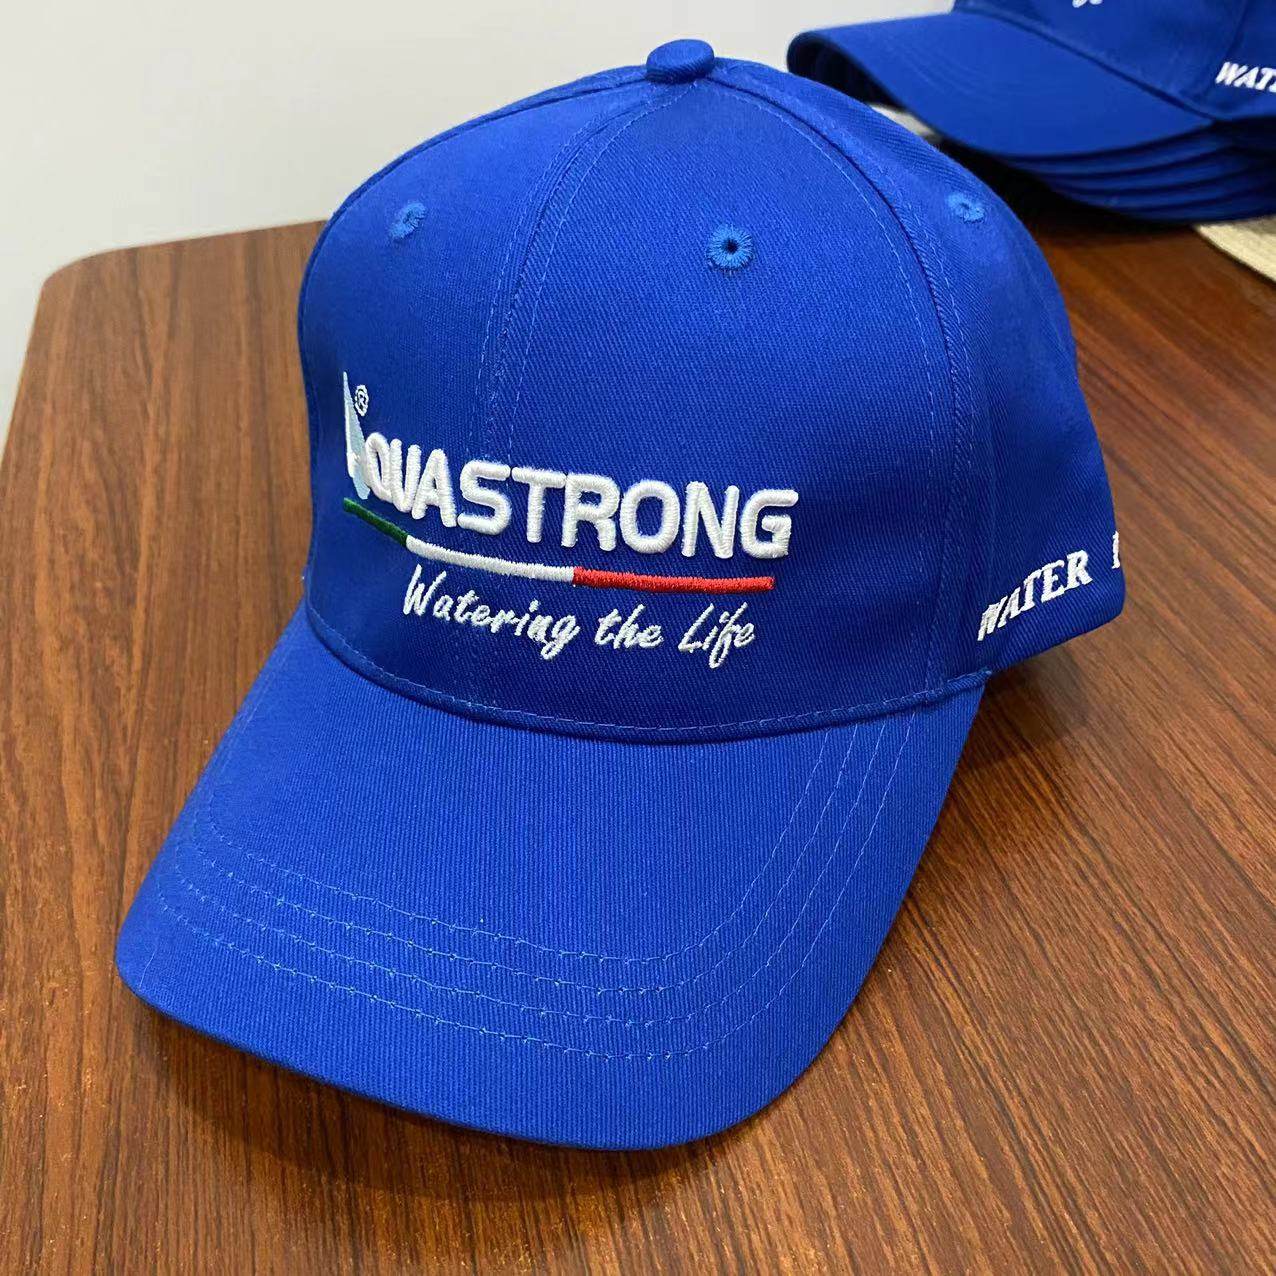 QUASTRONG Watering the life Baseball Hat blue56-57